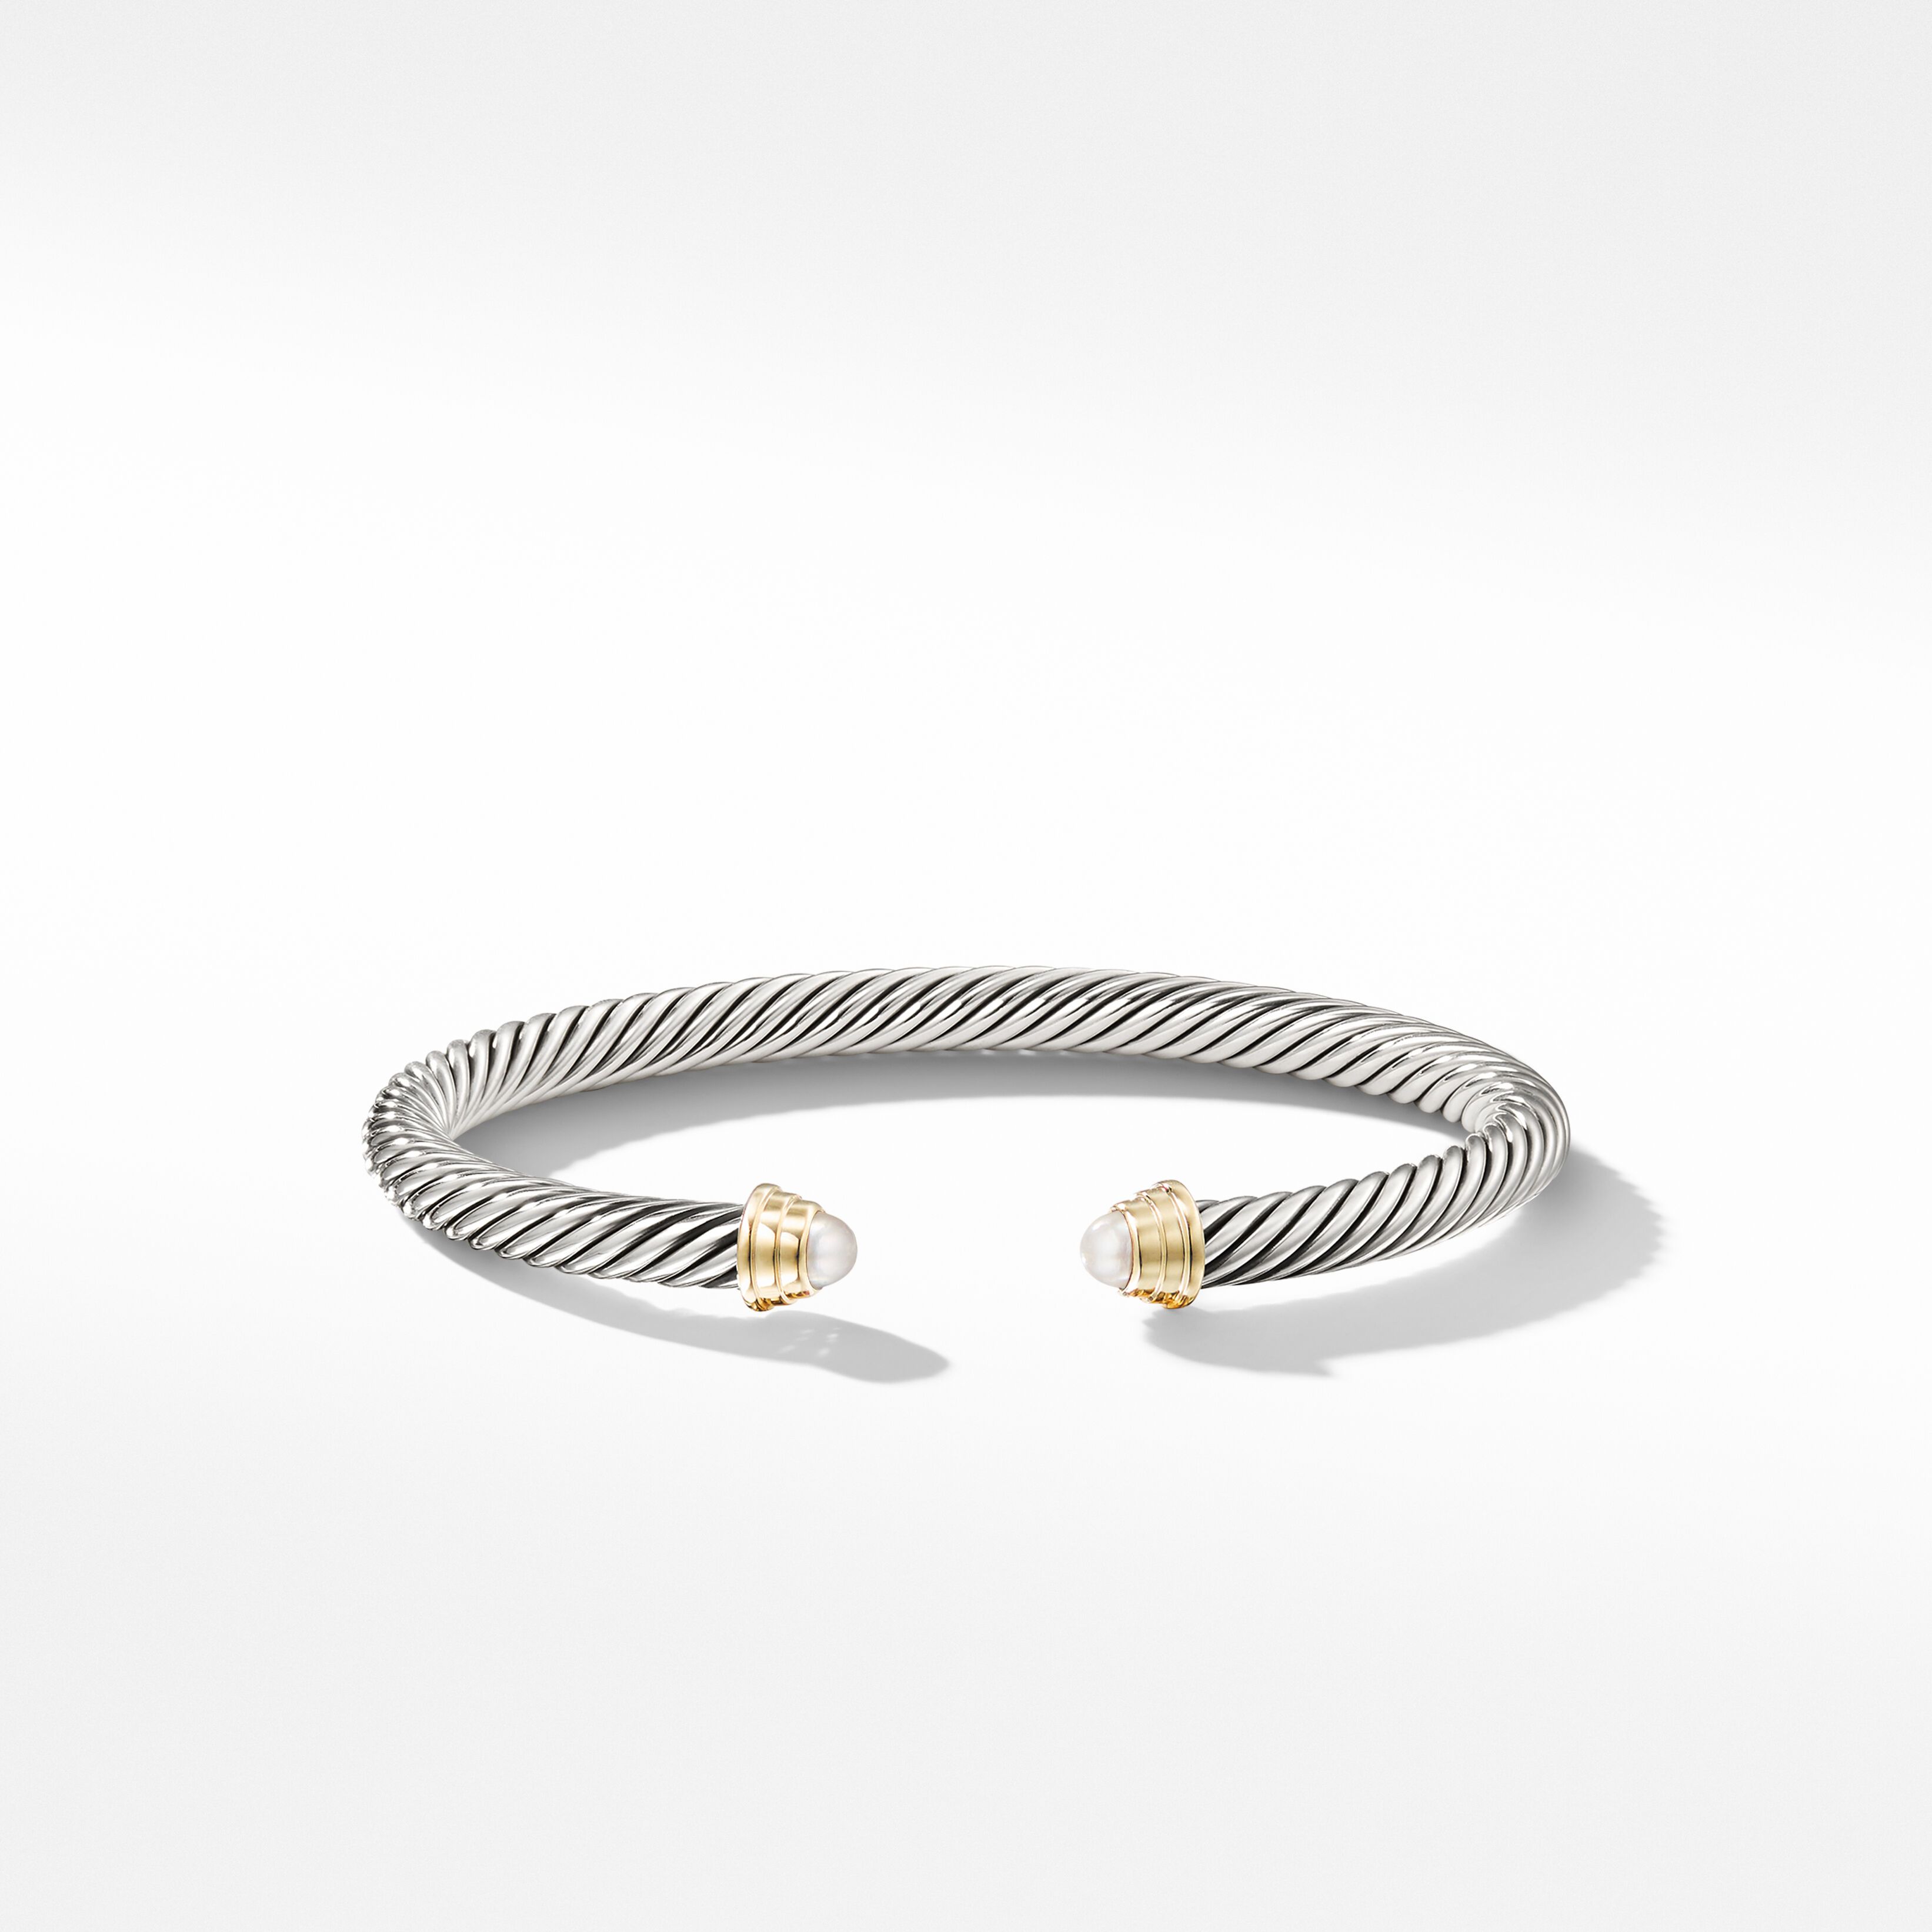 Cable Kids® Bracelet in Sterling Silver with Pearls and 14K Yellow Gold | David Yurman